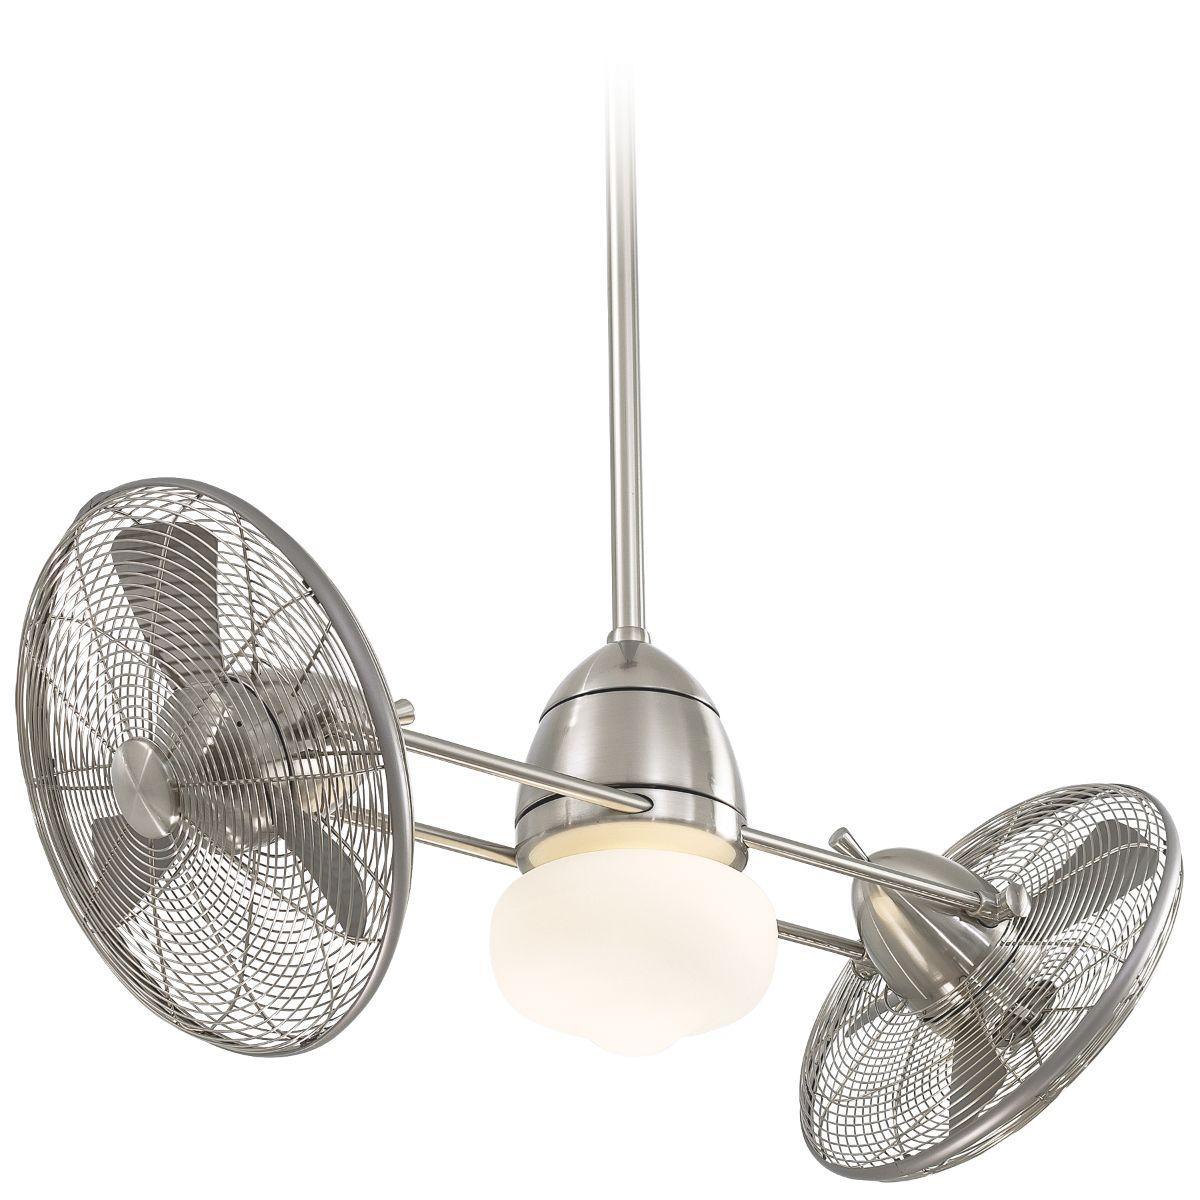 Gyro 42 Inch Contemporary Dual Outdoor Ceiling Fan With Light, Wall Control Included - Bees Lighting